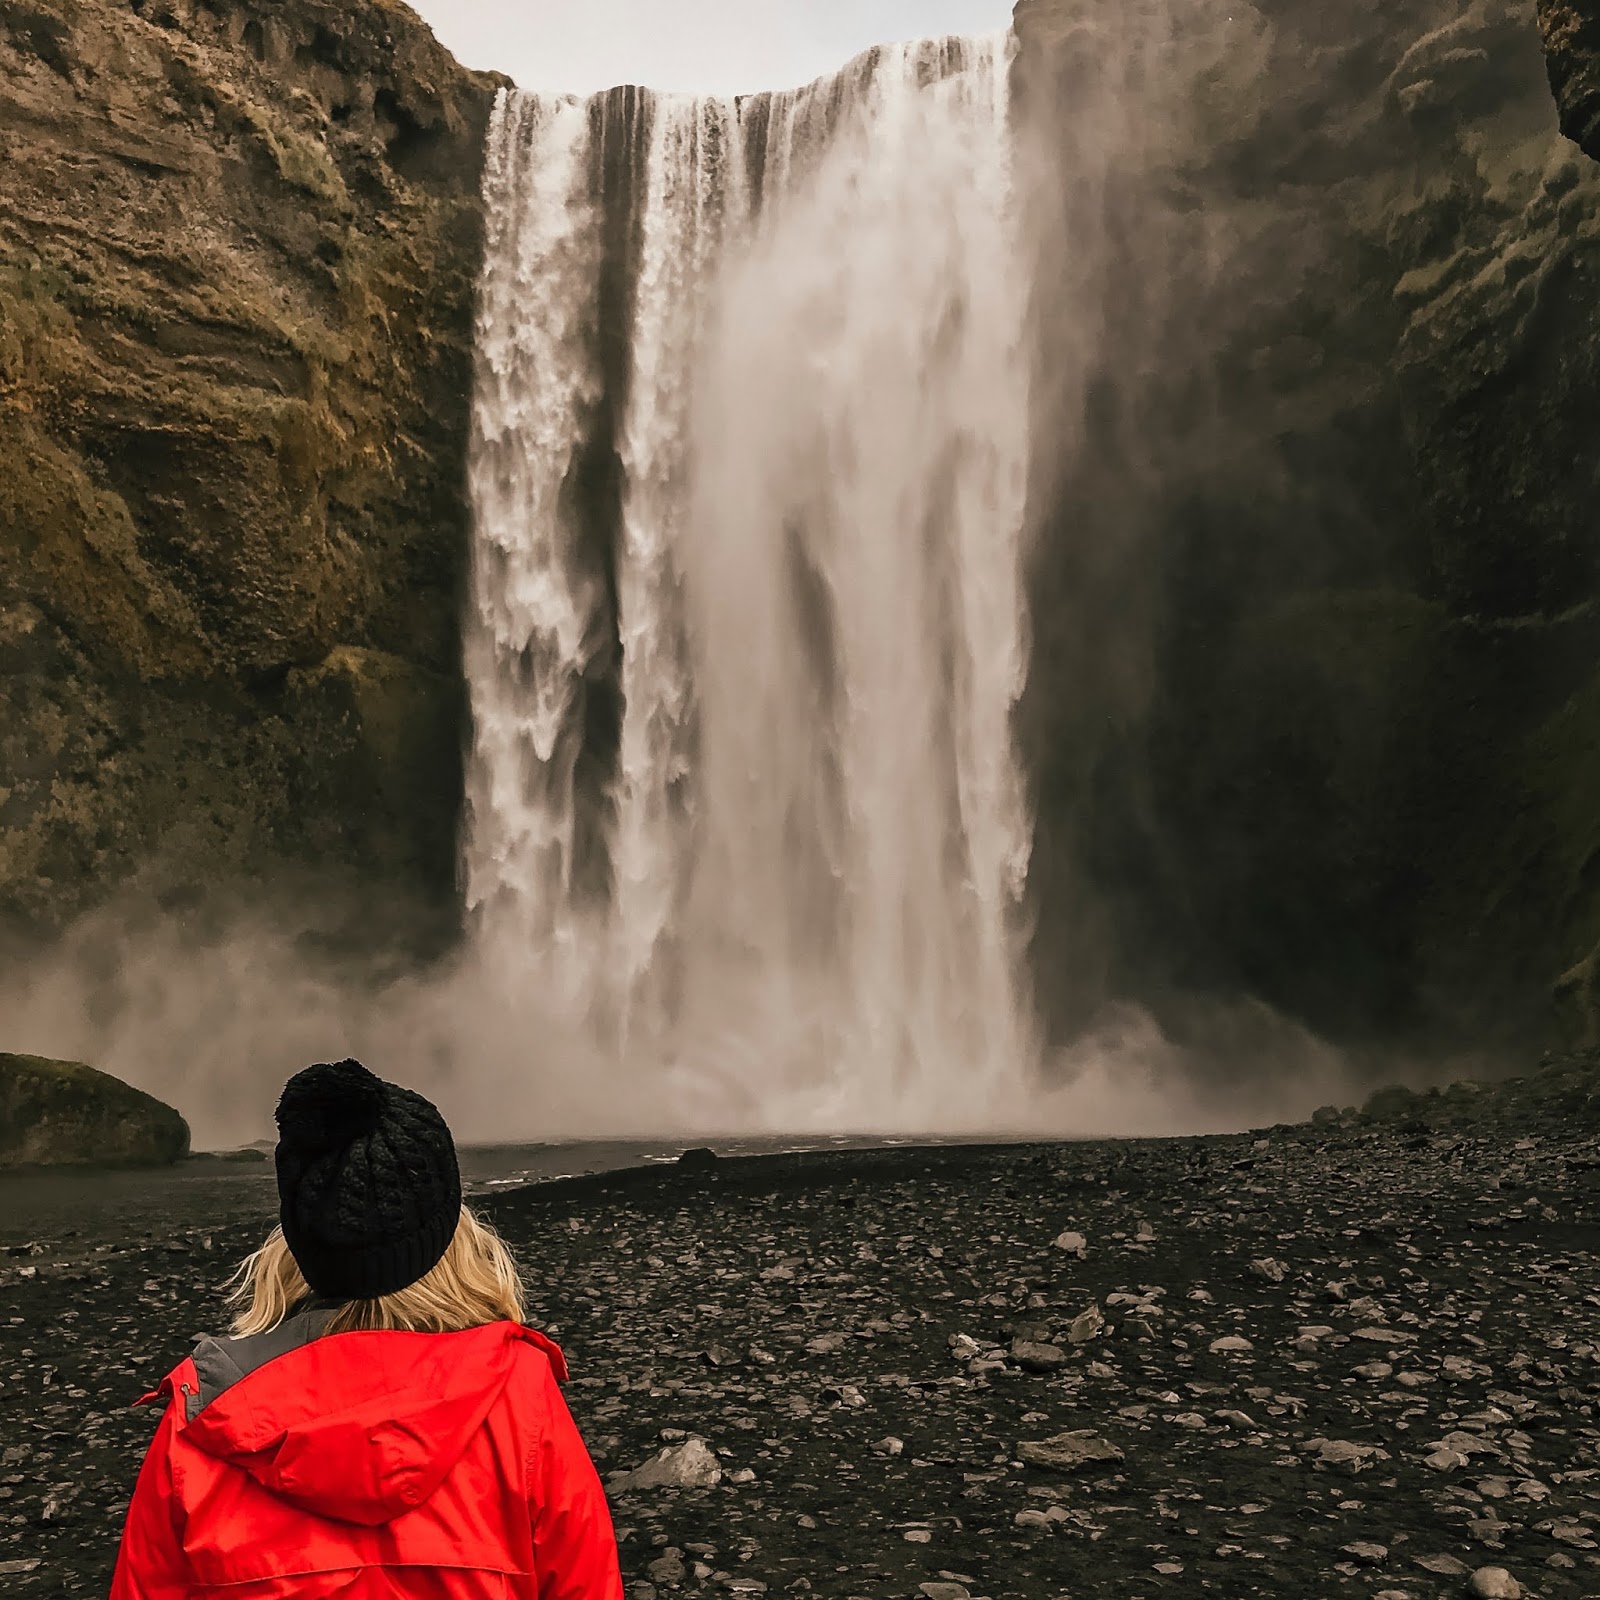 Enjoying the view at Skogafoss waterfall in southern Iceland